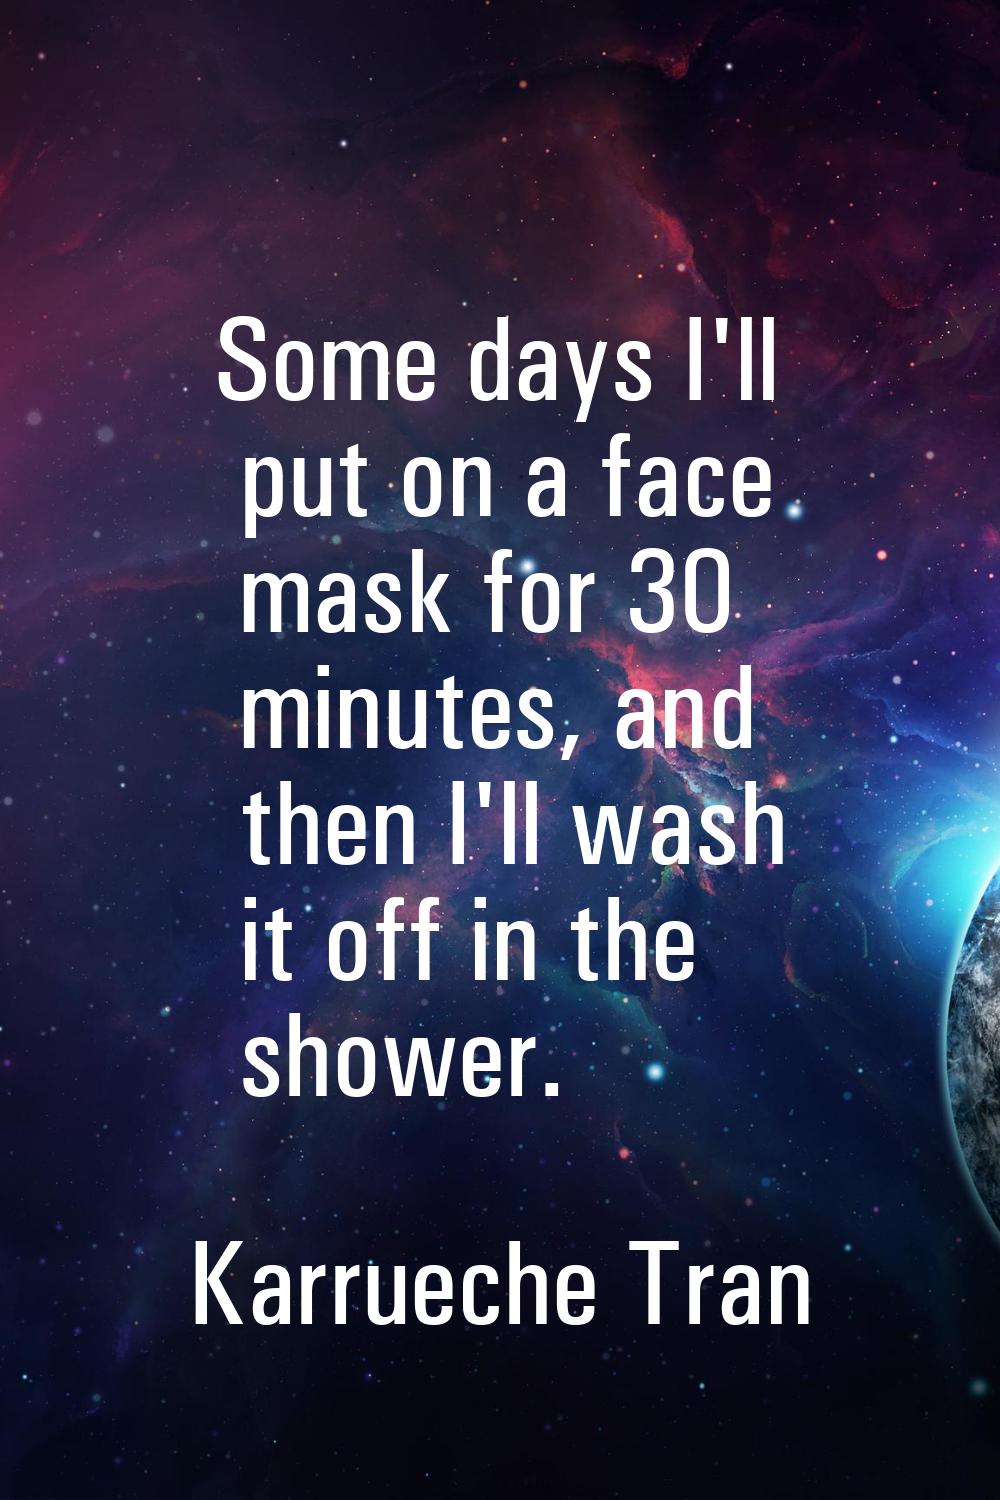 Some days I'll put on a face mask for 30 minutes, and then I'll wash it off in the shower.